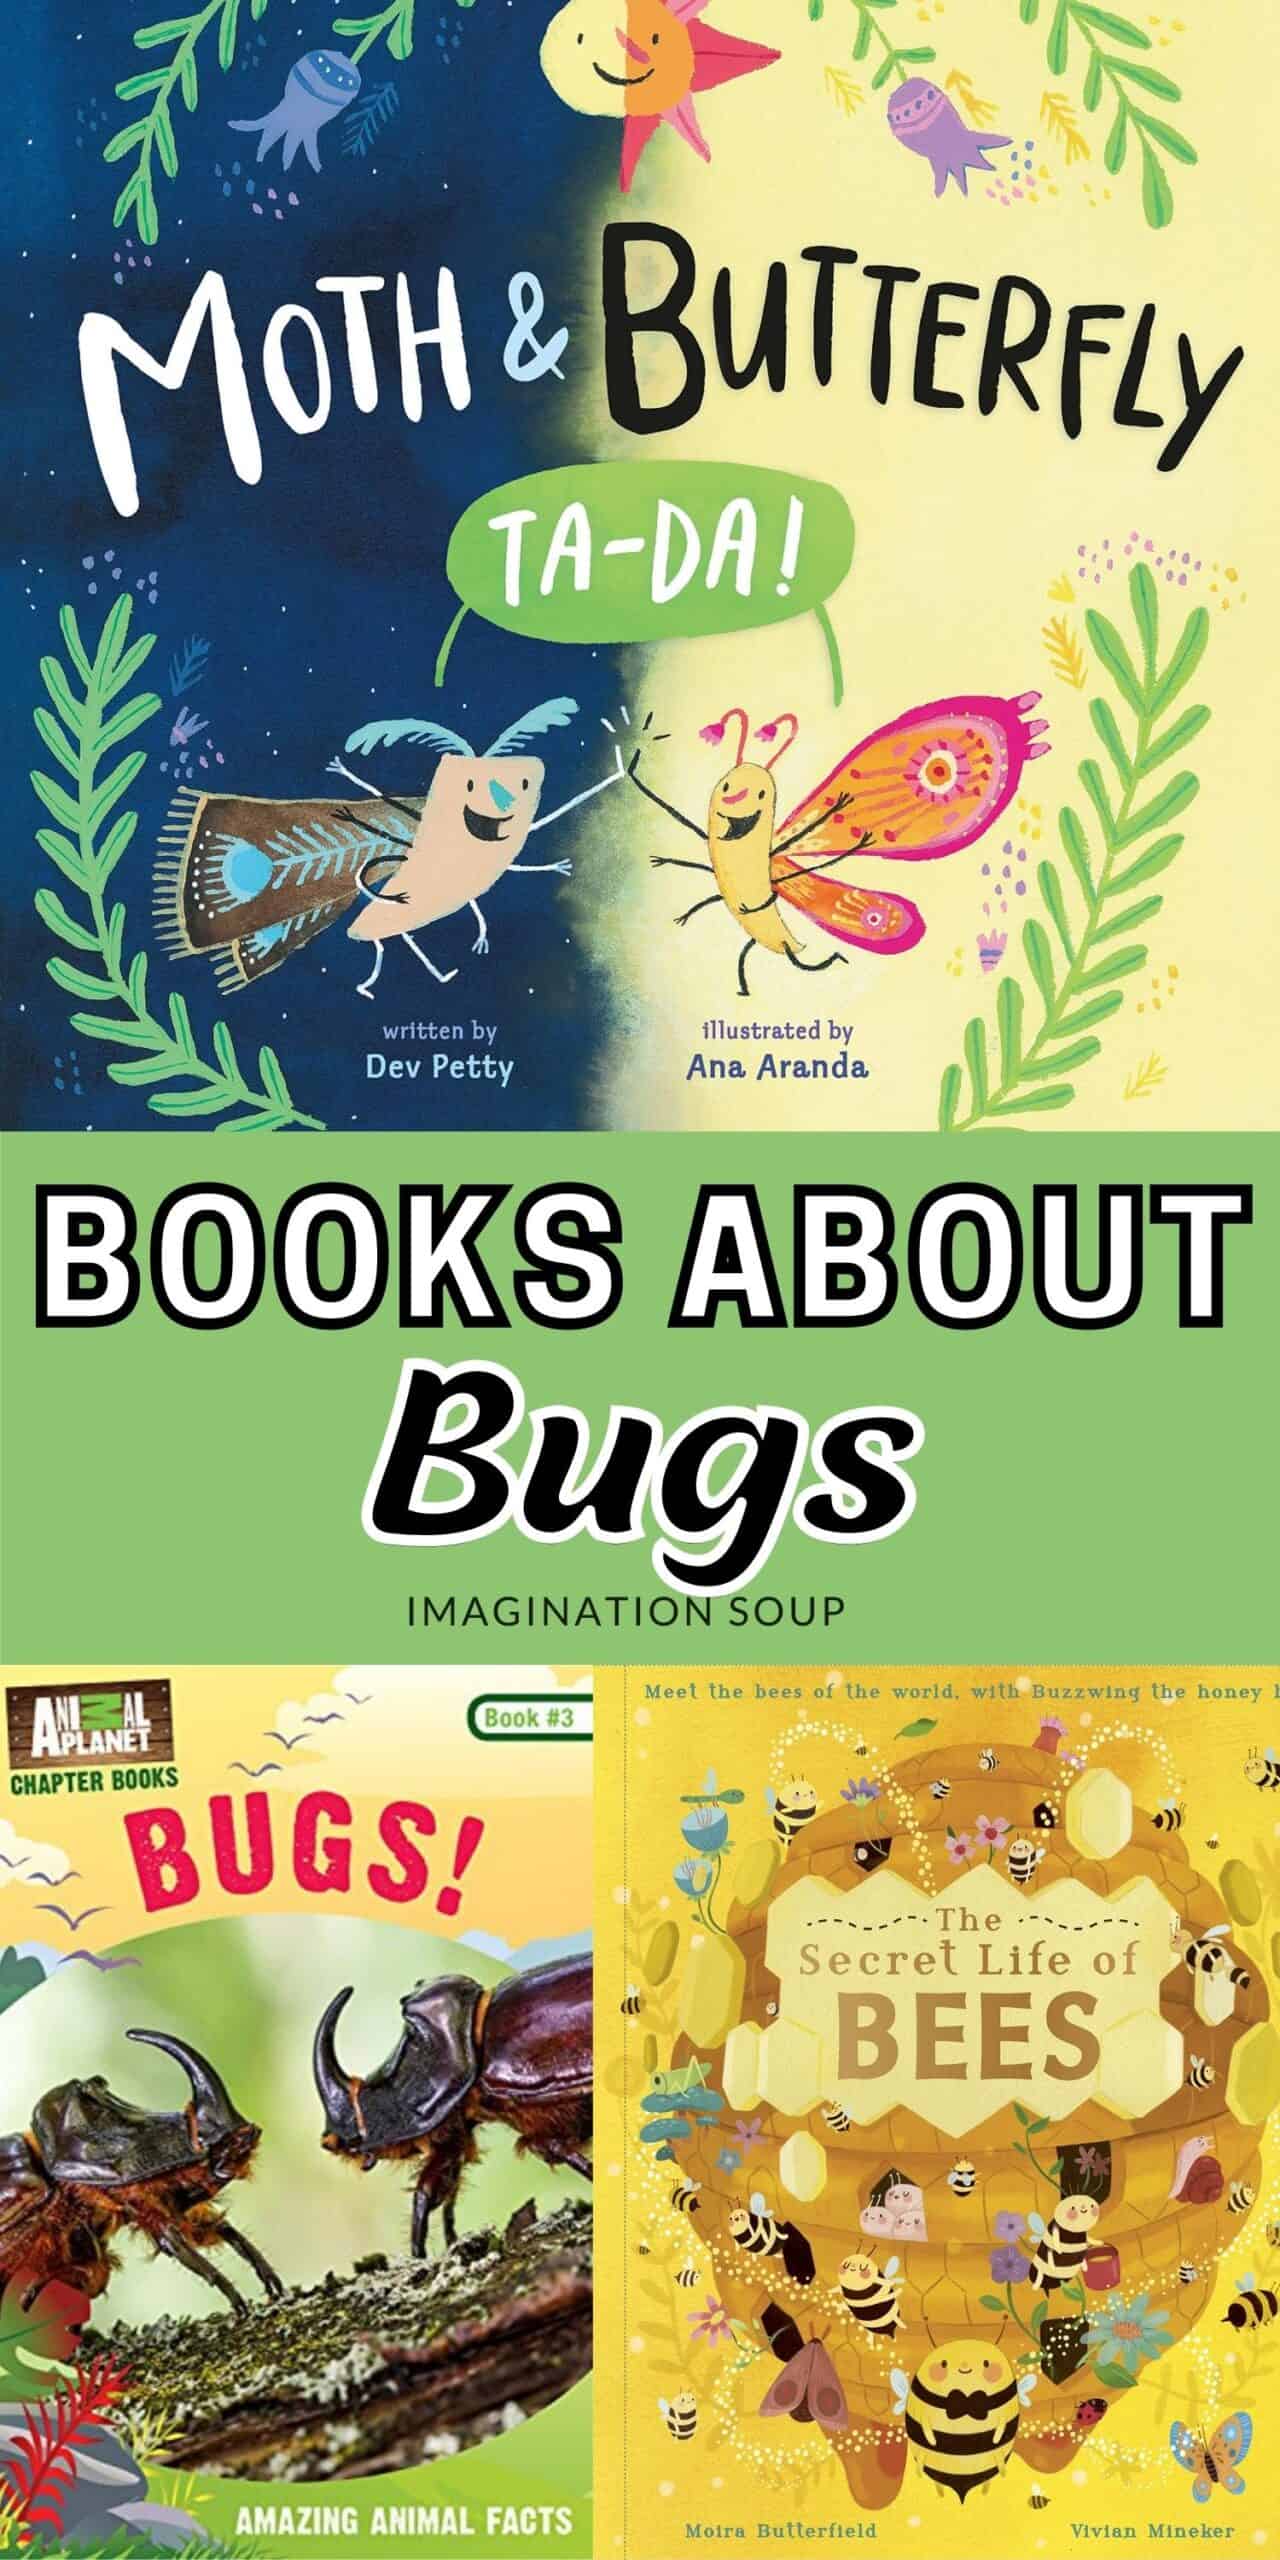 Best Children's Books About Bugs (Insects)